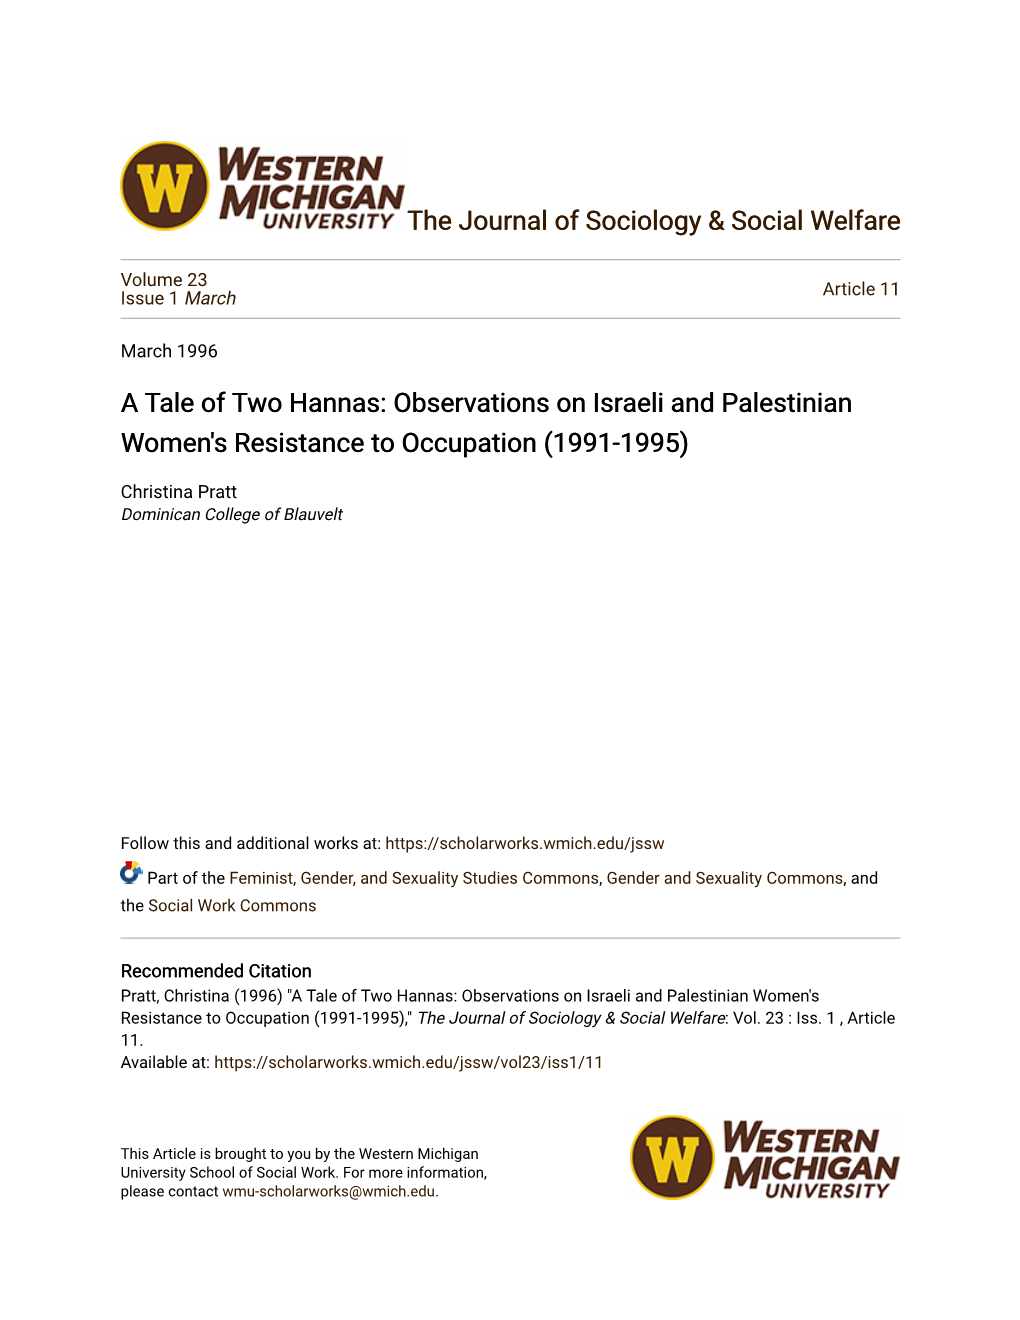 Observations on Israeli and Palestinian Women's Resistance to Occupation (1991-1995)